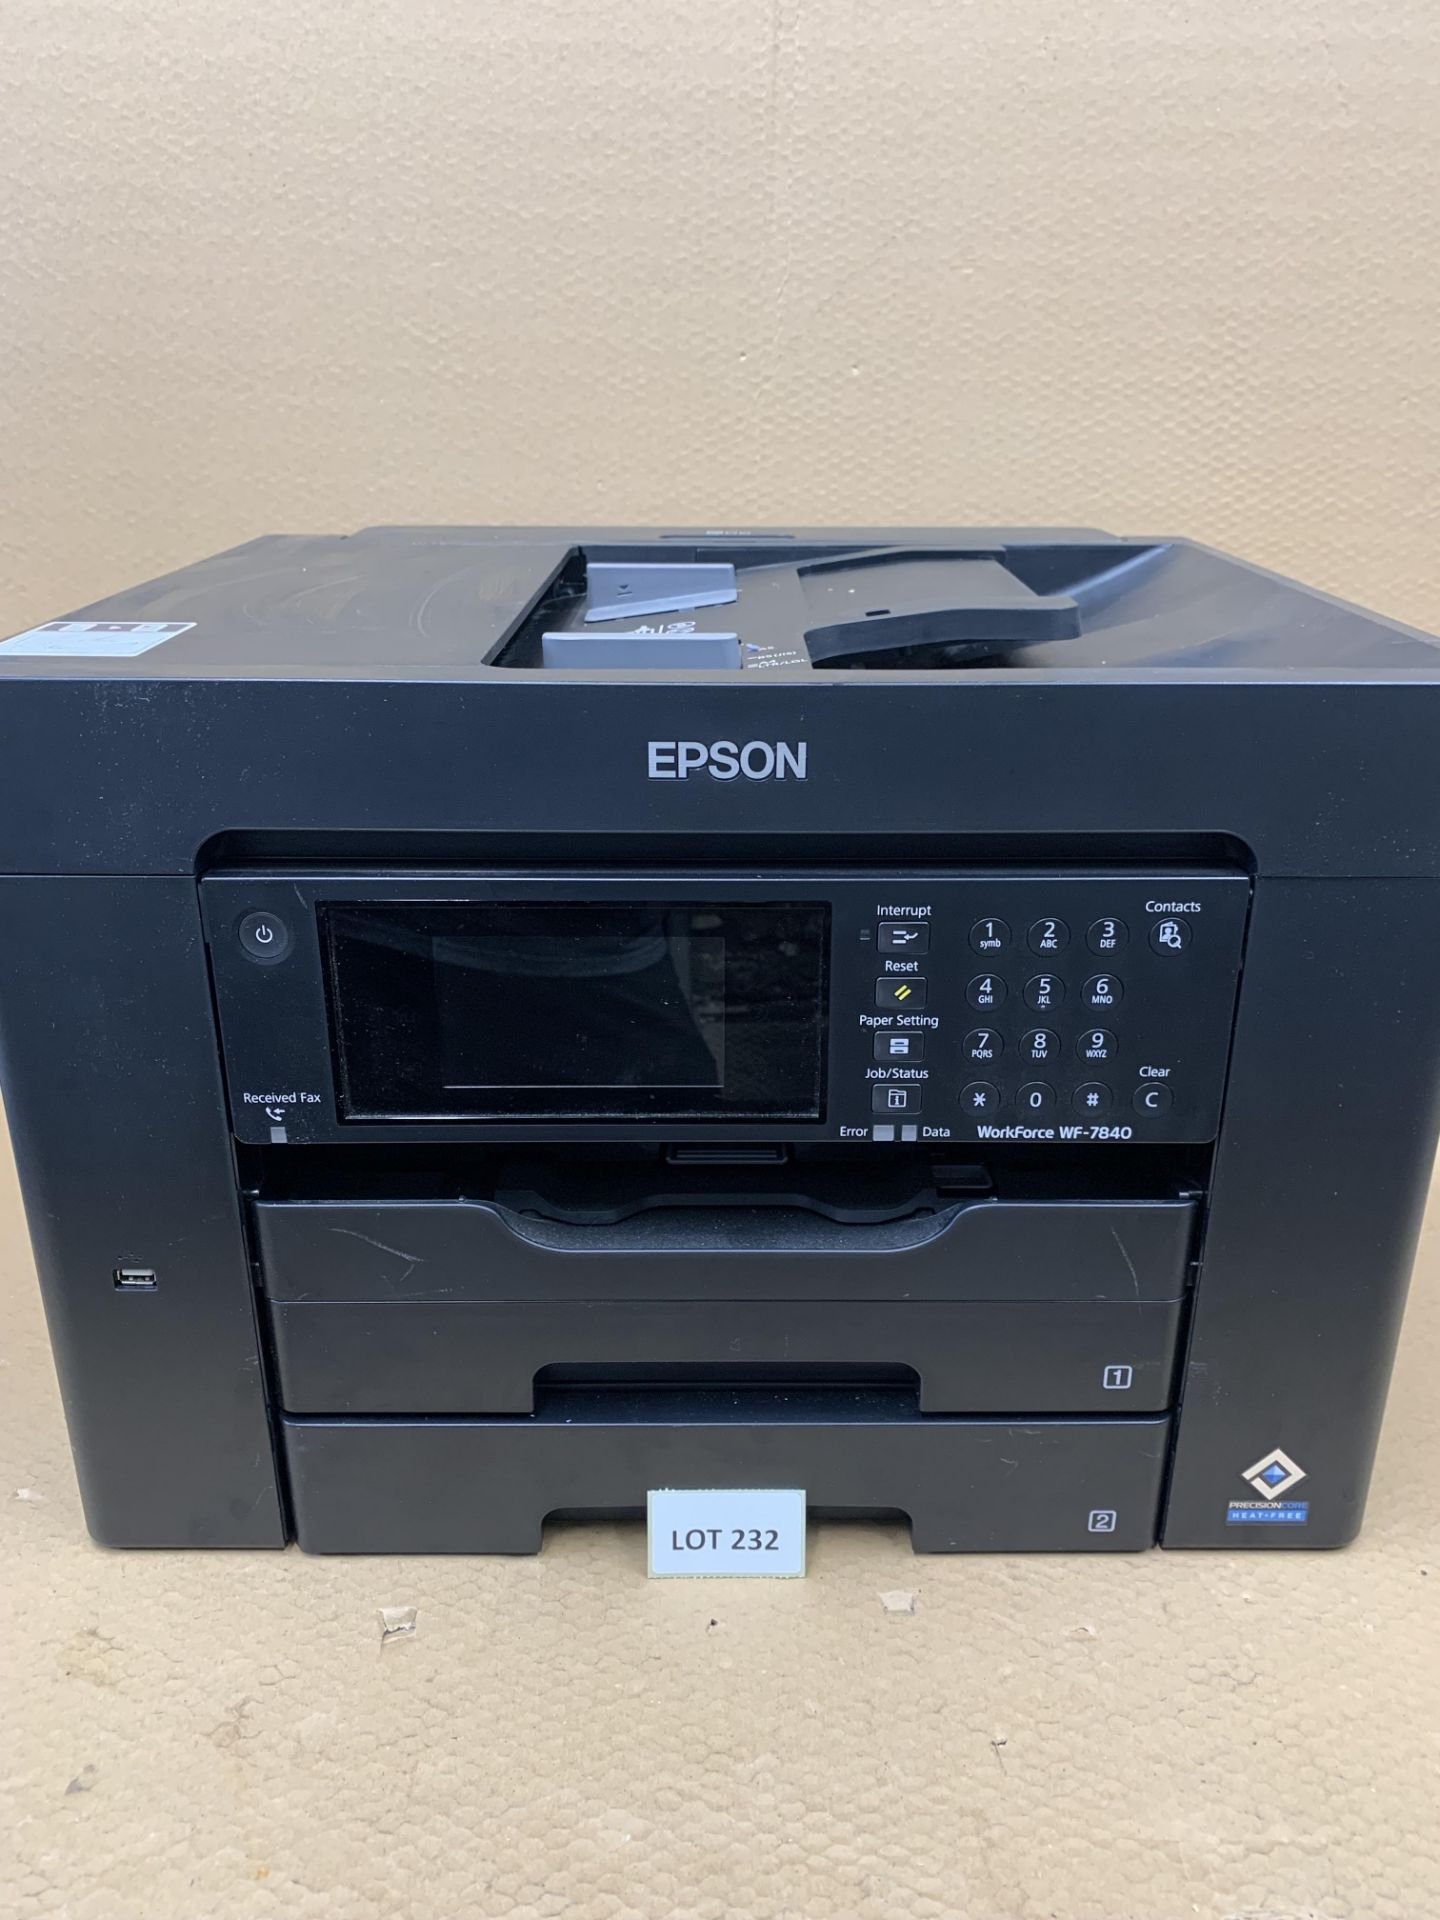 Epson WorkForce WF-7840 - All-in-One A3+ Wireless Colour Printer with Scanner, Copier, Fax,